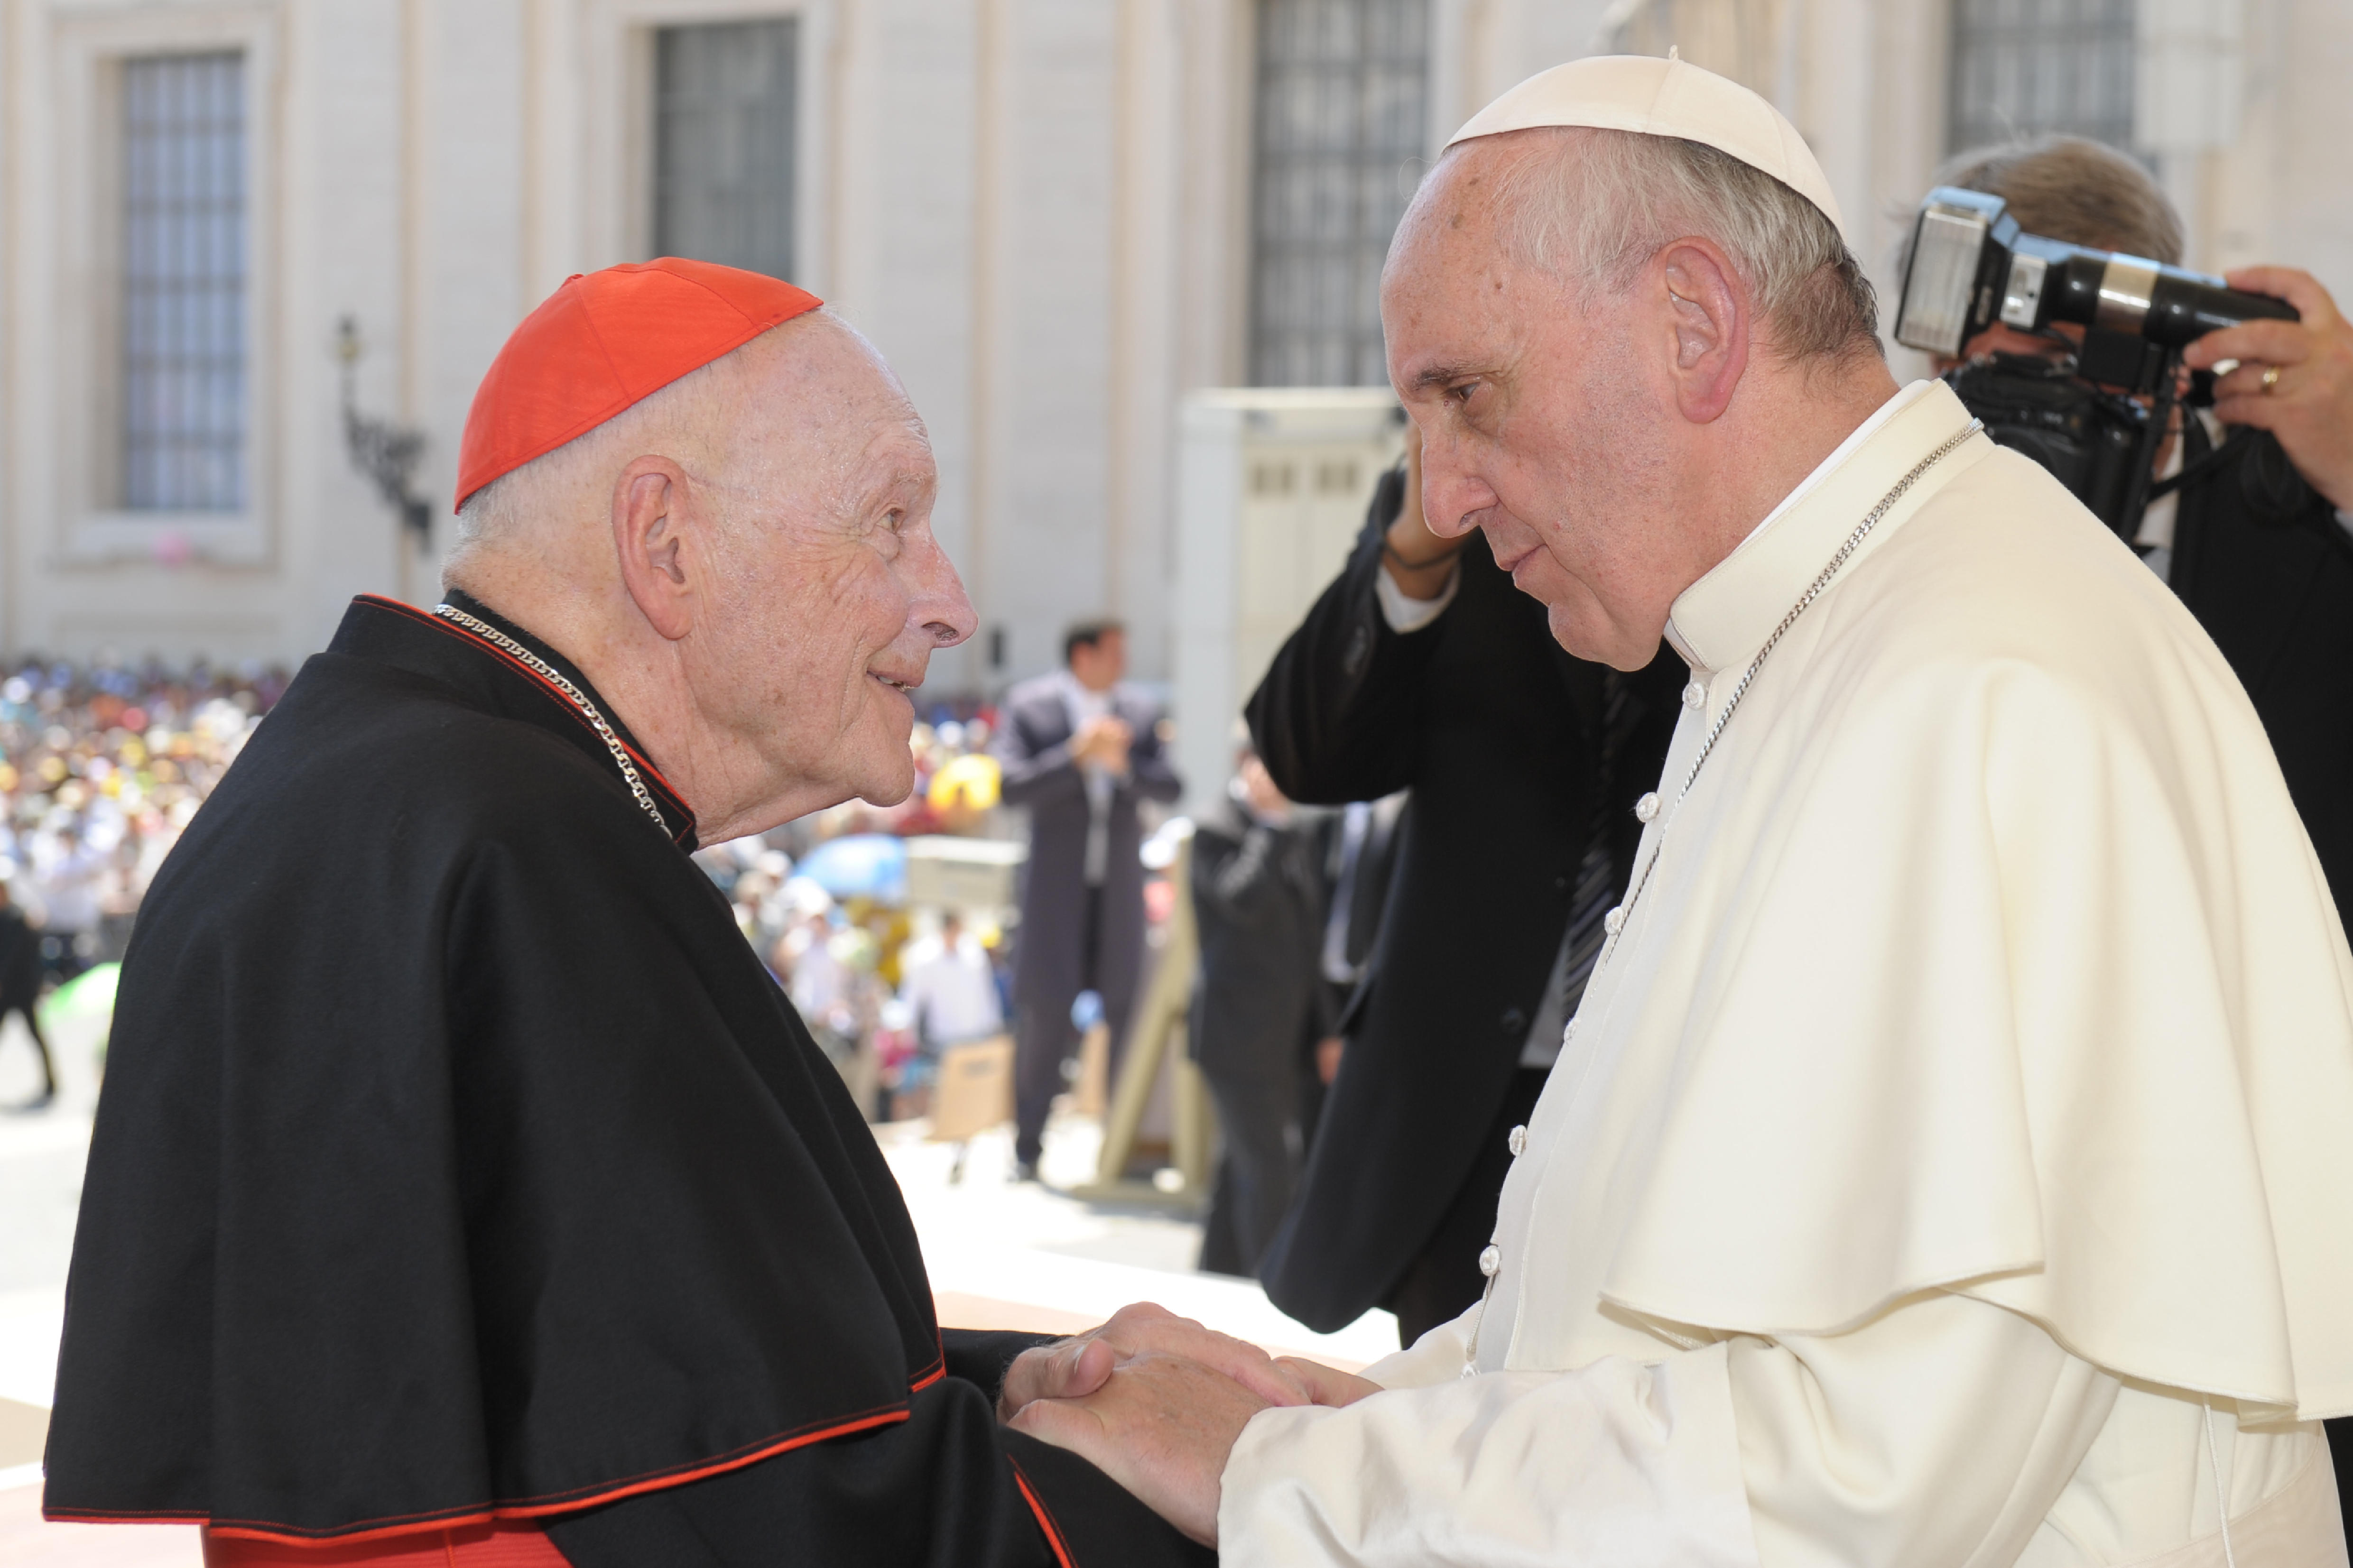 Pope Francis denies knowing of allegations against McCarrick